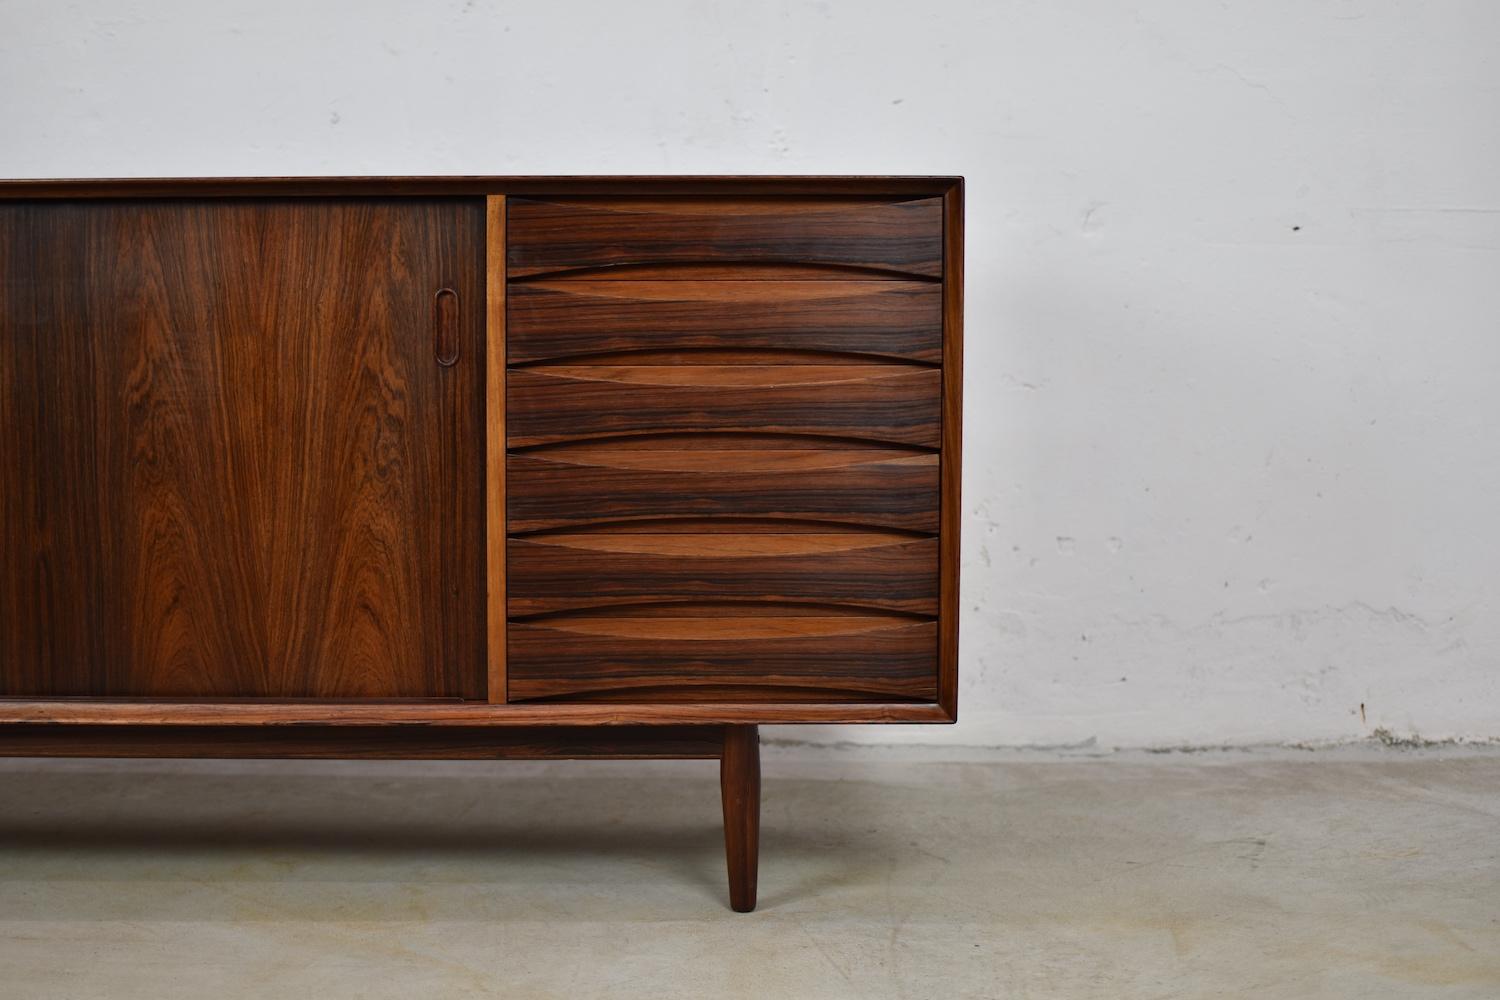 Lovely OS29 sideboard by Arne Vodder for Sibast, Denmark, 1950s. This rare cabinet is made out of rosewood and has two sliding doors and a series of marvelous curved drawers. Typical raised edge on the top and overall in very good original condition